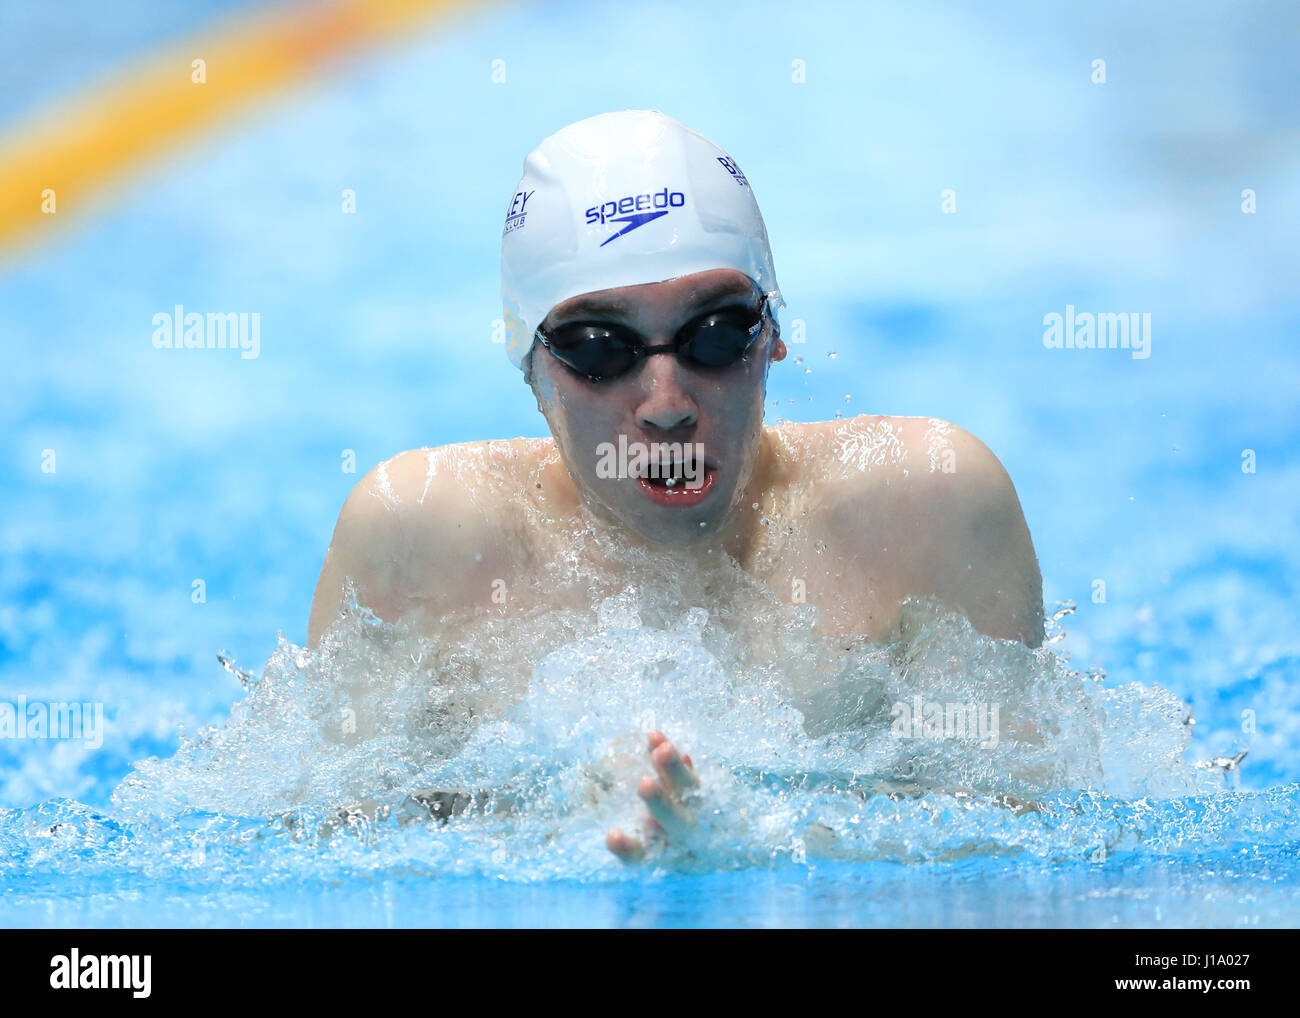 Matthew Rogers competes in the Mens Open 50m Backstroke heats during day two of the 2017 British Swimming Championships at Ponds Forge, Sheffield. PRESS ASSOCIATION Photo. Picture date: Wednesday April 19, 2017. See PA story SWIMMING Sheffield. Photo credit should read: Tim Goode/PA Wire Stock Photo